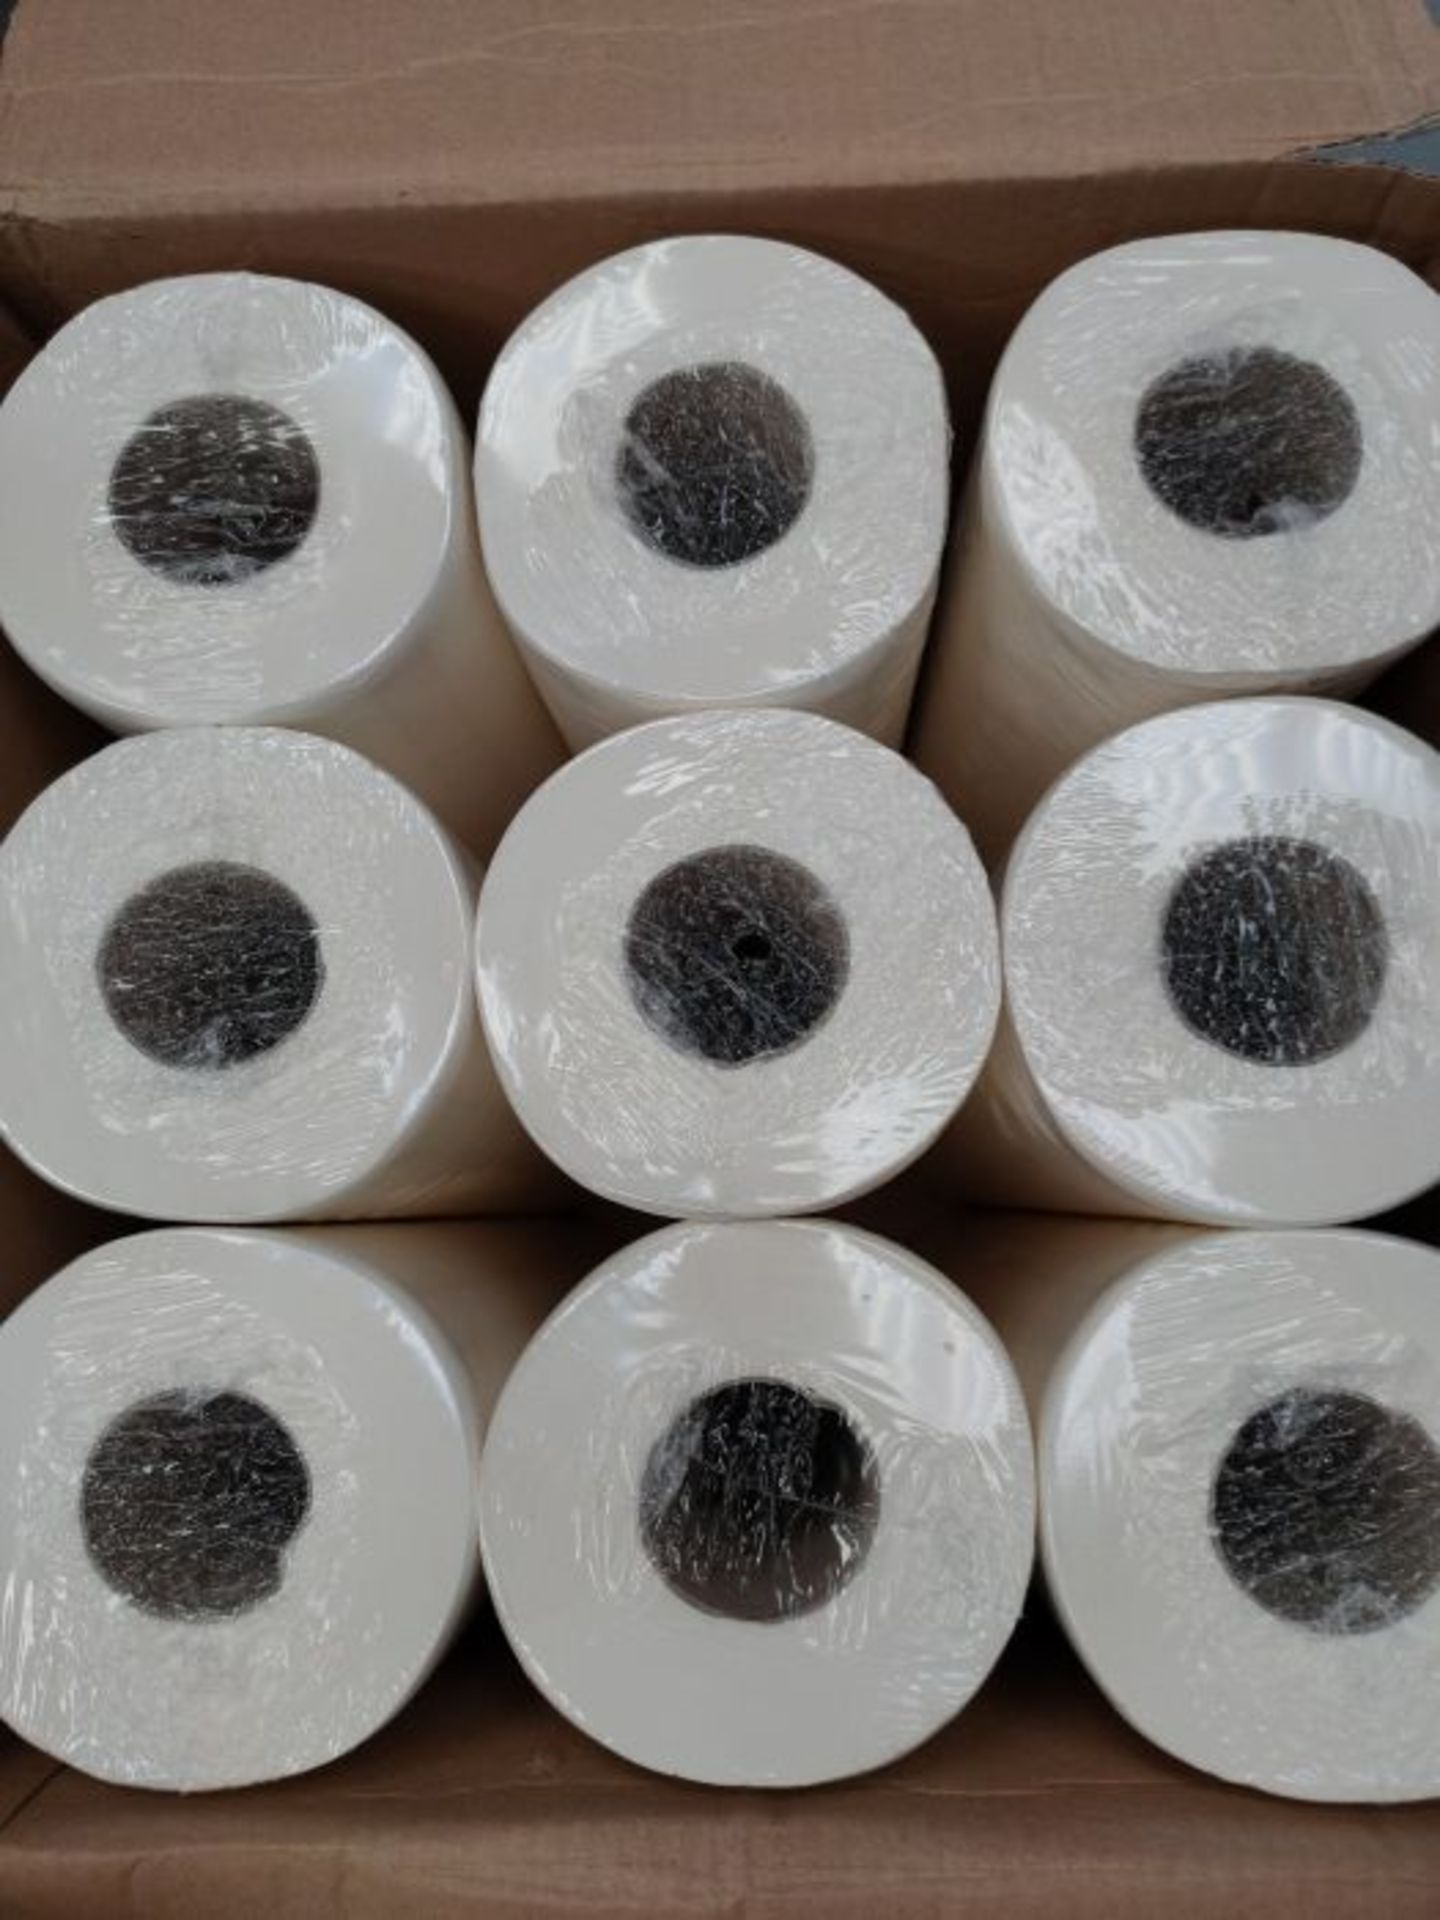 AmazonCommercial Premium Cellulose Couch Rolls, 20" - 2 PLY - 50 Metres per roll, 9-Pa - Image 2 of 2